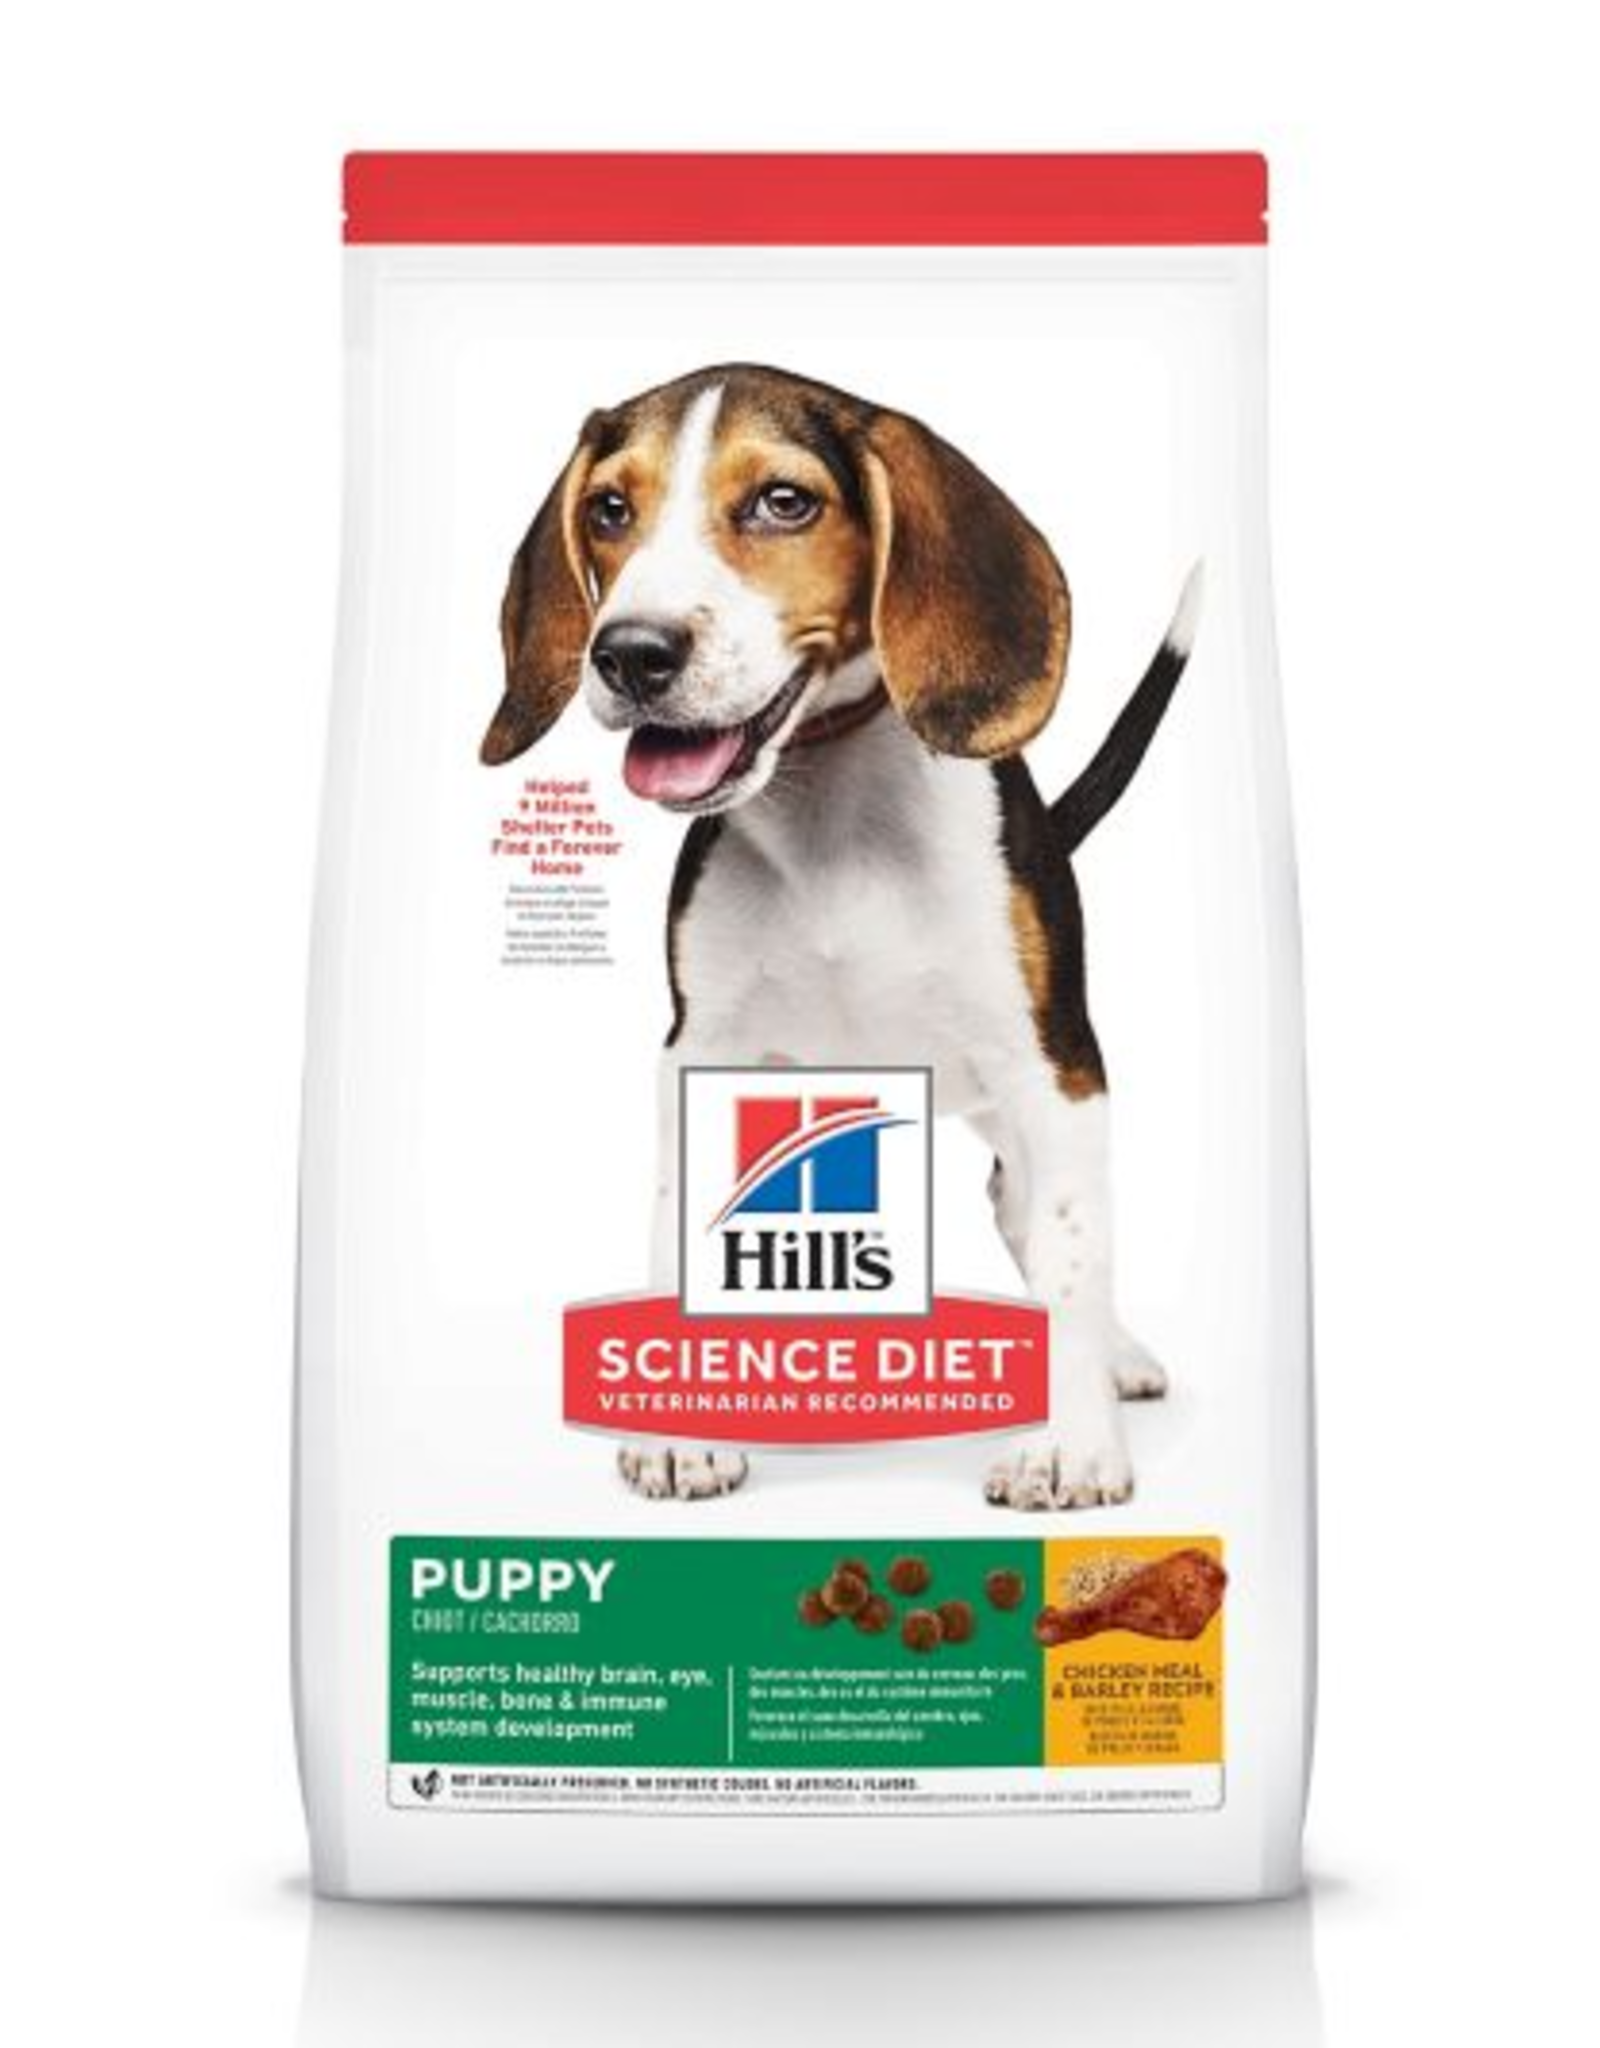 Hill's Science Pet Hill's Science Diet Puppy Chicken Meal & Barley Recipe 4.5 lb bag (7133)